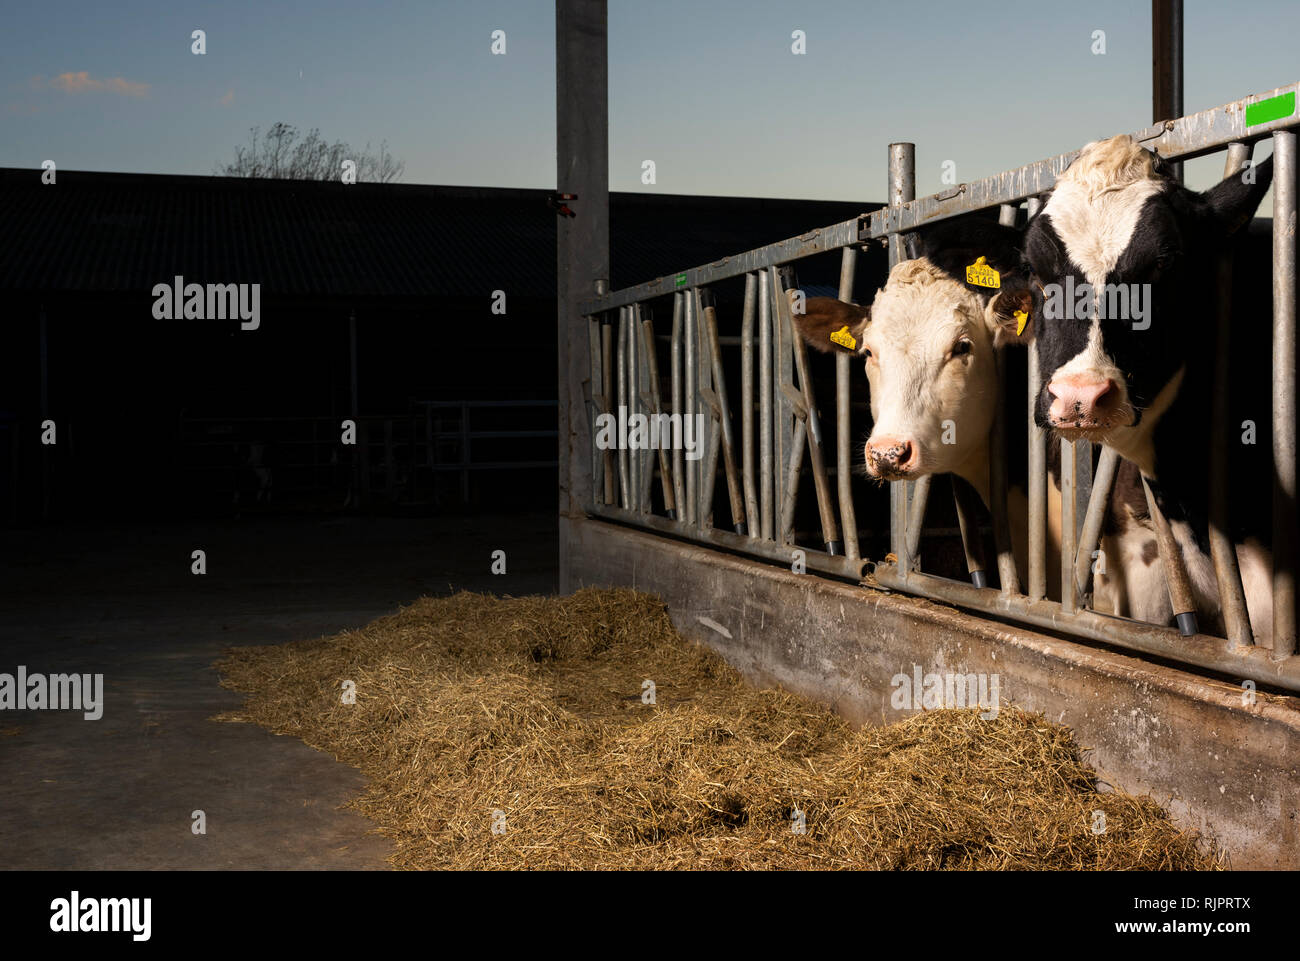 Cows in pen open to fresh air and light, Wyns, Friesland, Netherlands Stock Photo